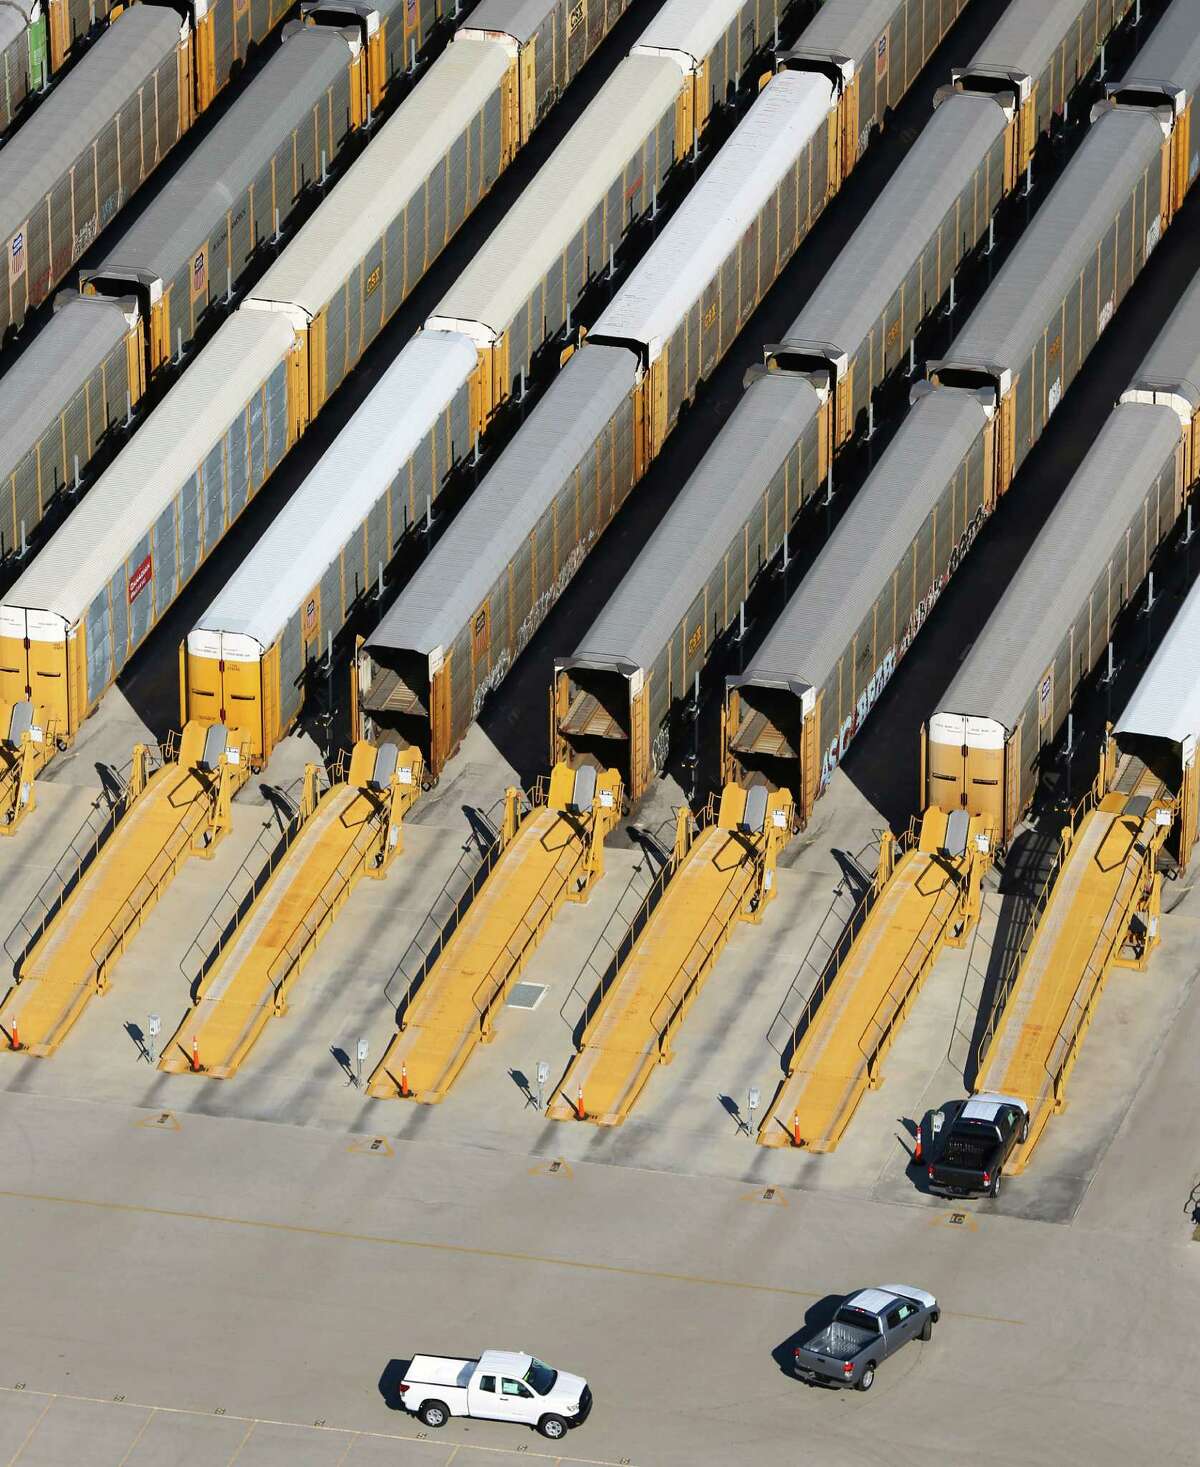 A Toyota Tundra pickup trucks, seen in a Jan. 18, 2013 aerial picture, are driven onto a rail car for delivery after being built at the Toyota Motor Manufacturing, Texas, Inc. plant in south Bexar County. The TMMTX plant, announced in 2003, now builds Tundra and Tacoma pickup trucks.